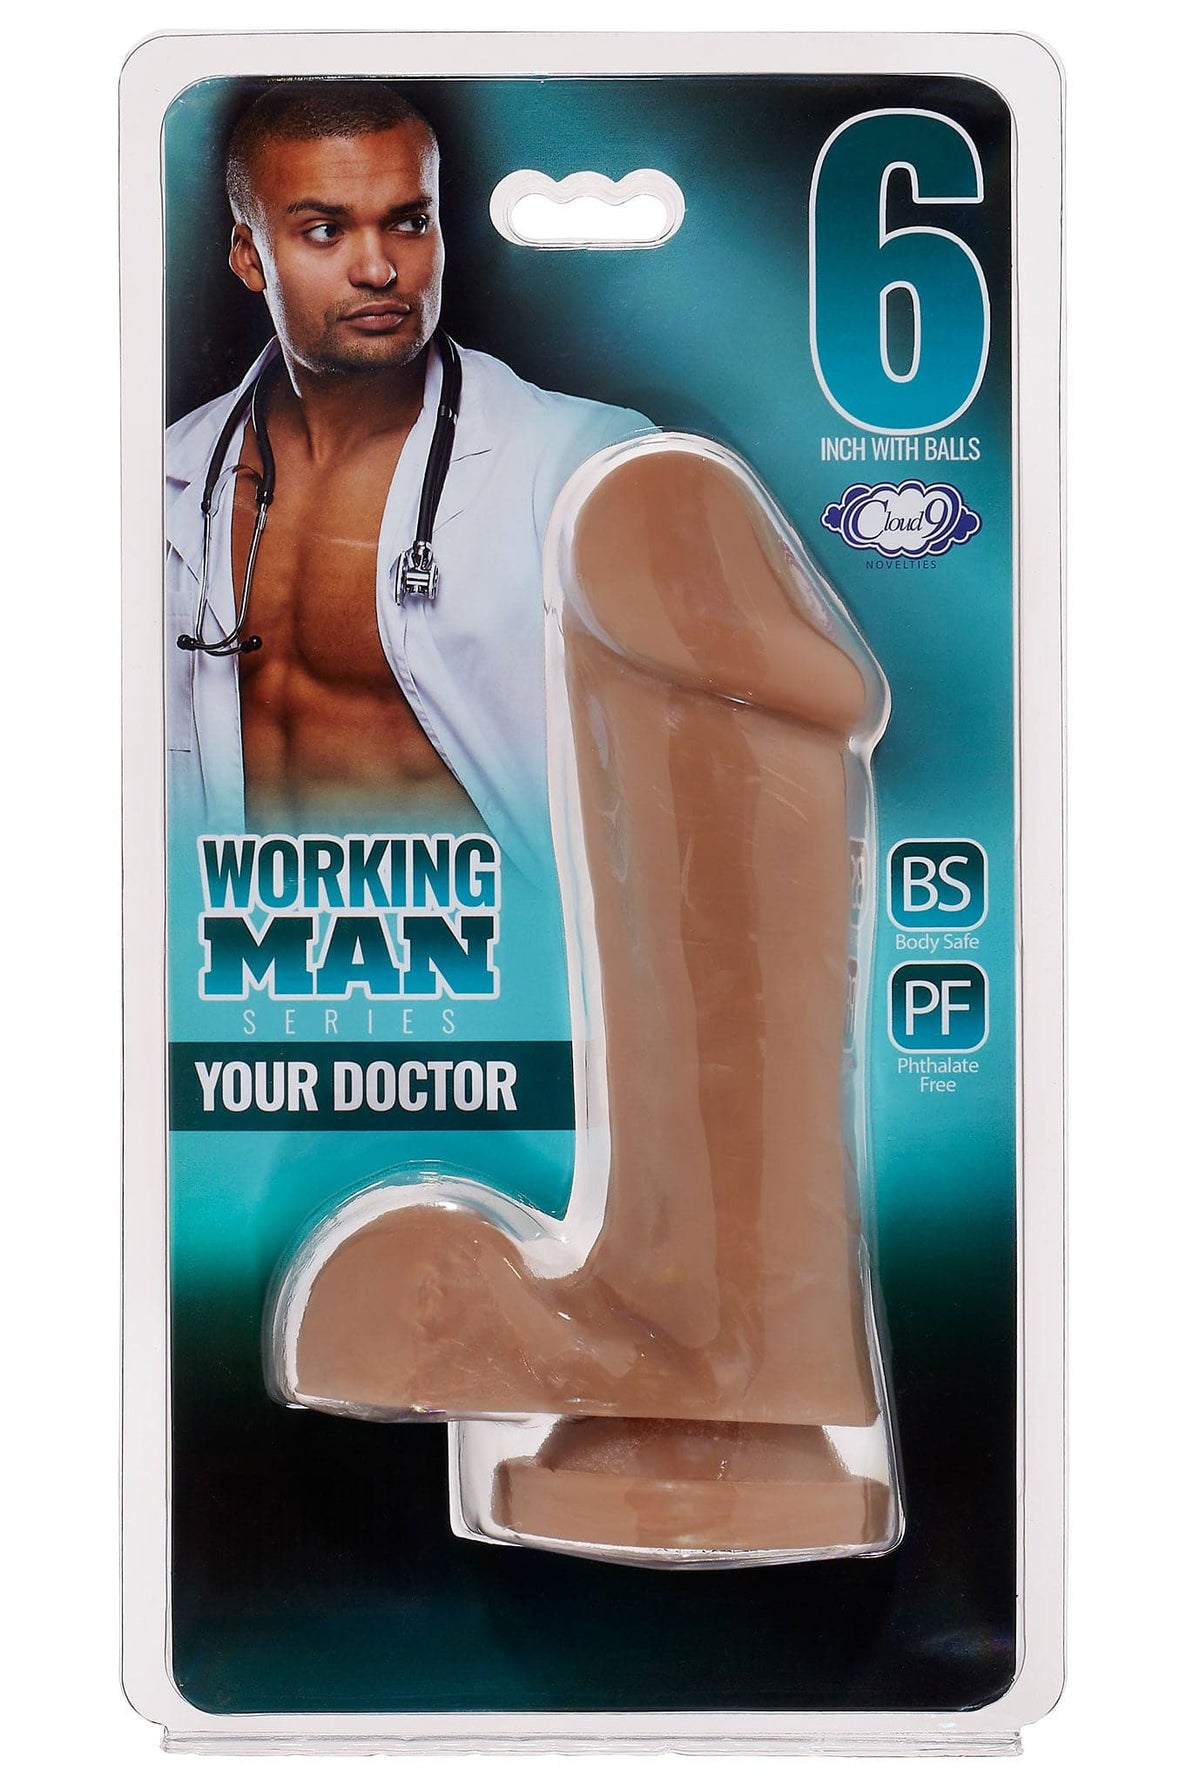 cloud 9 working man 6 inch with balls your doctor tan